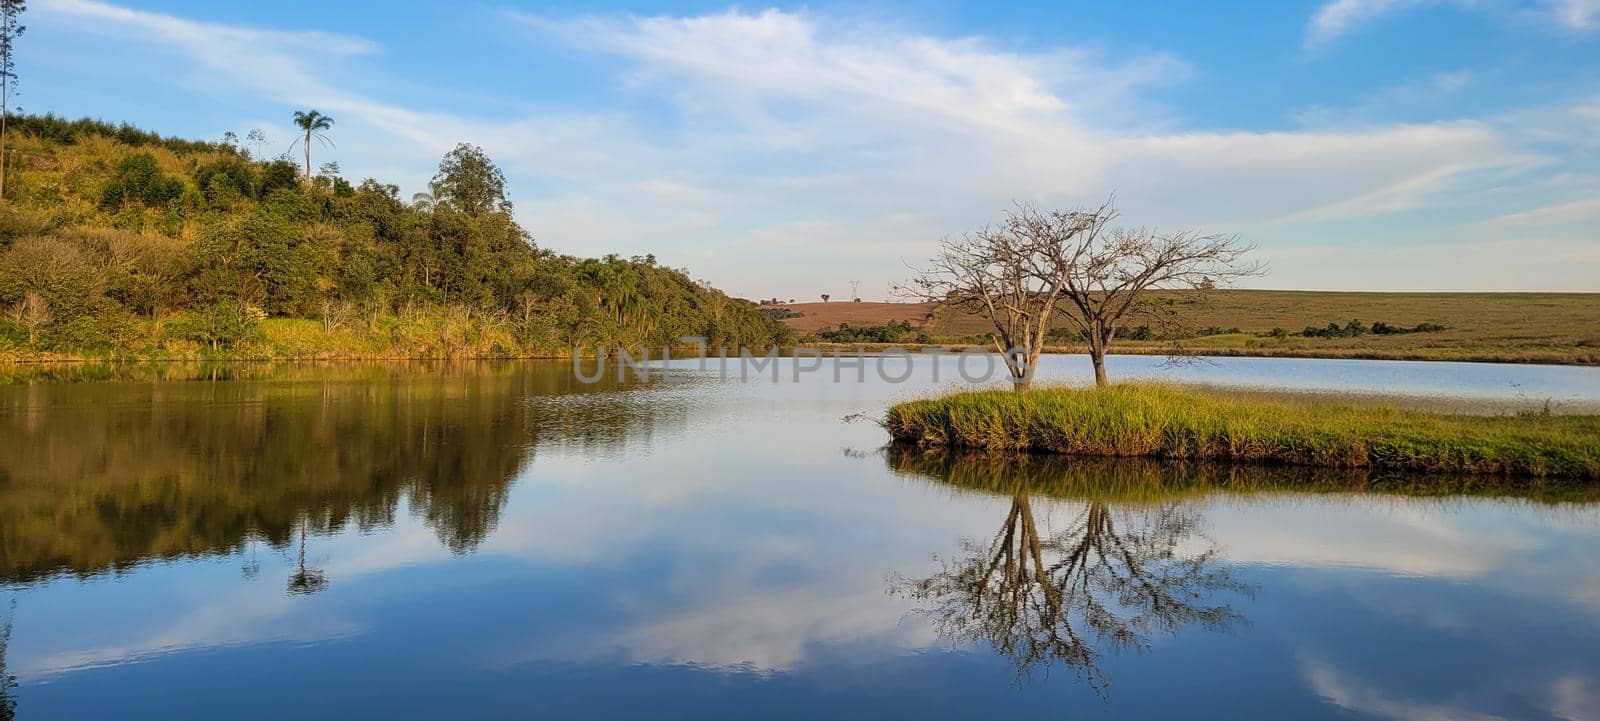 lake with a natural landscape of a farm in the countryside of Brazil with trees and lawn around it